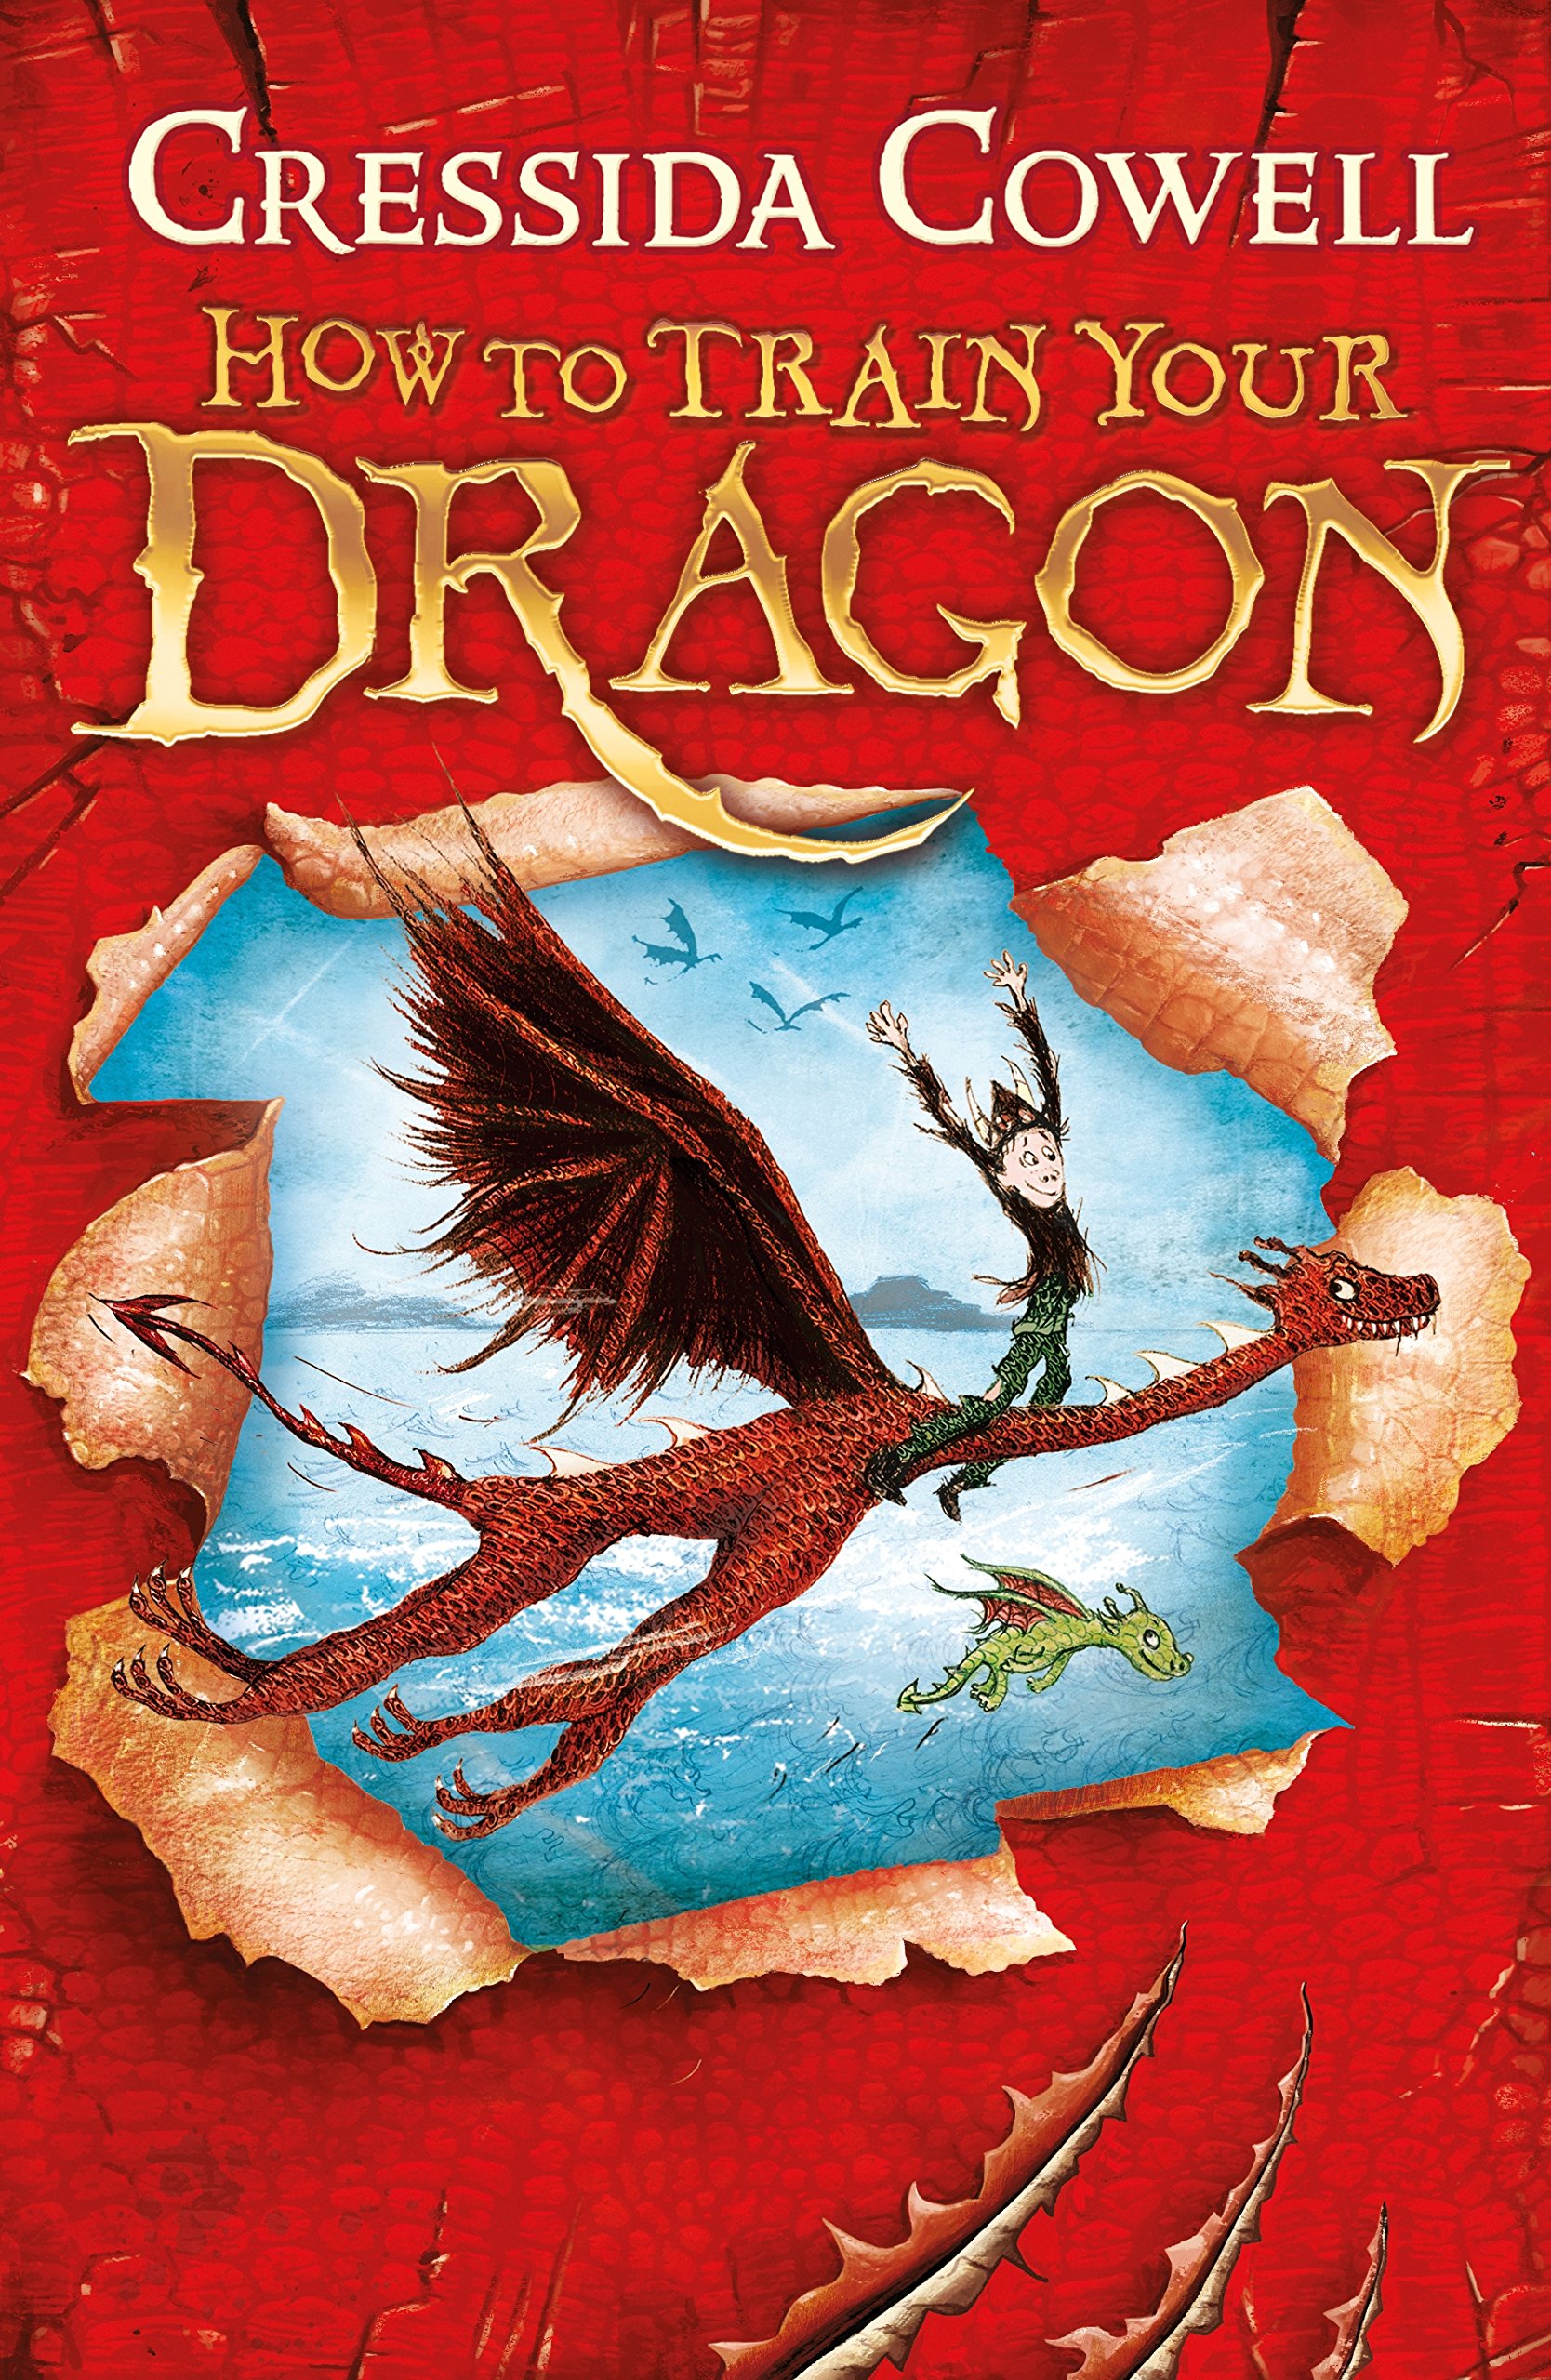 How to Train Your Dragon series by Cressida Cowell